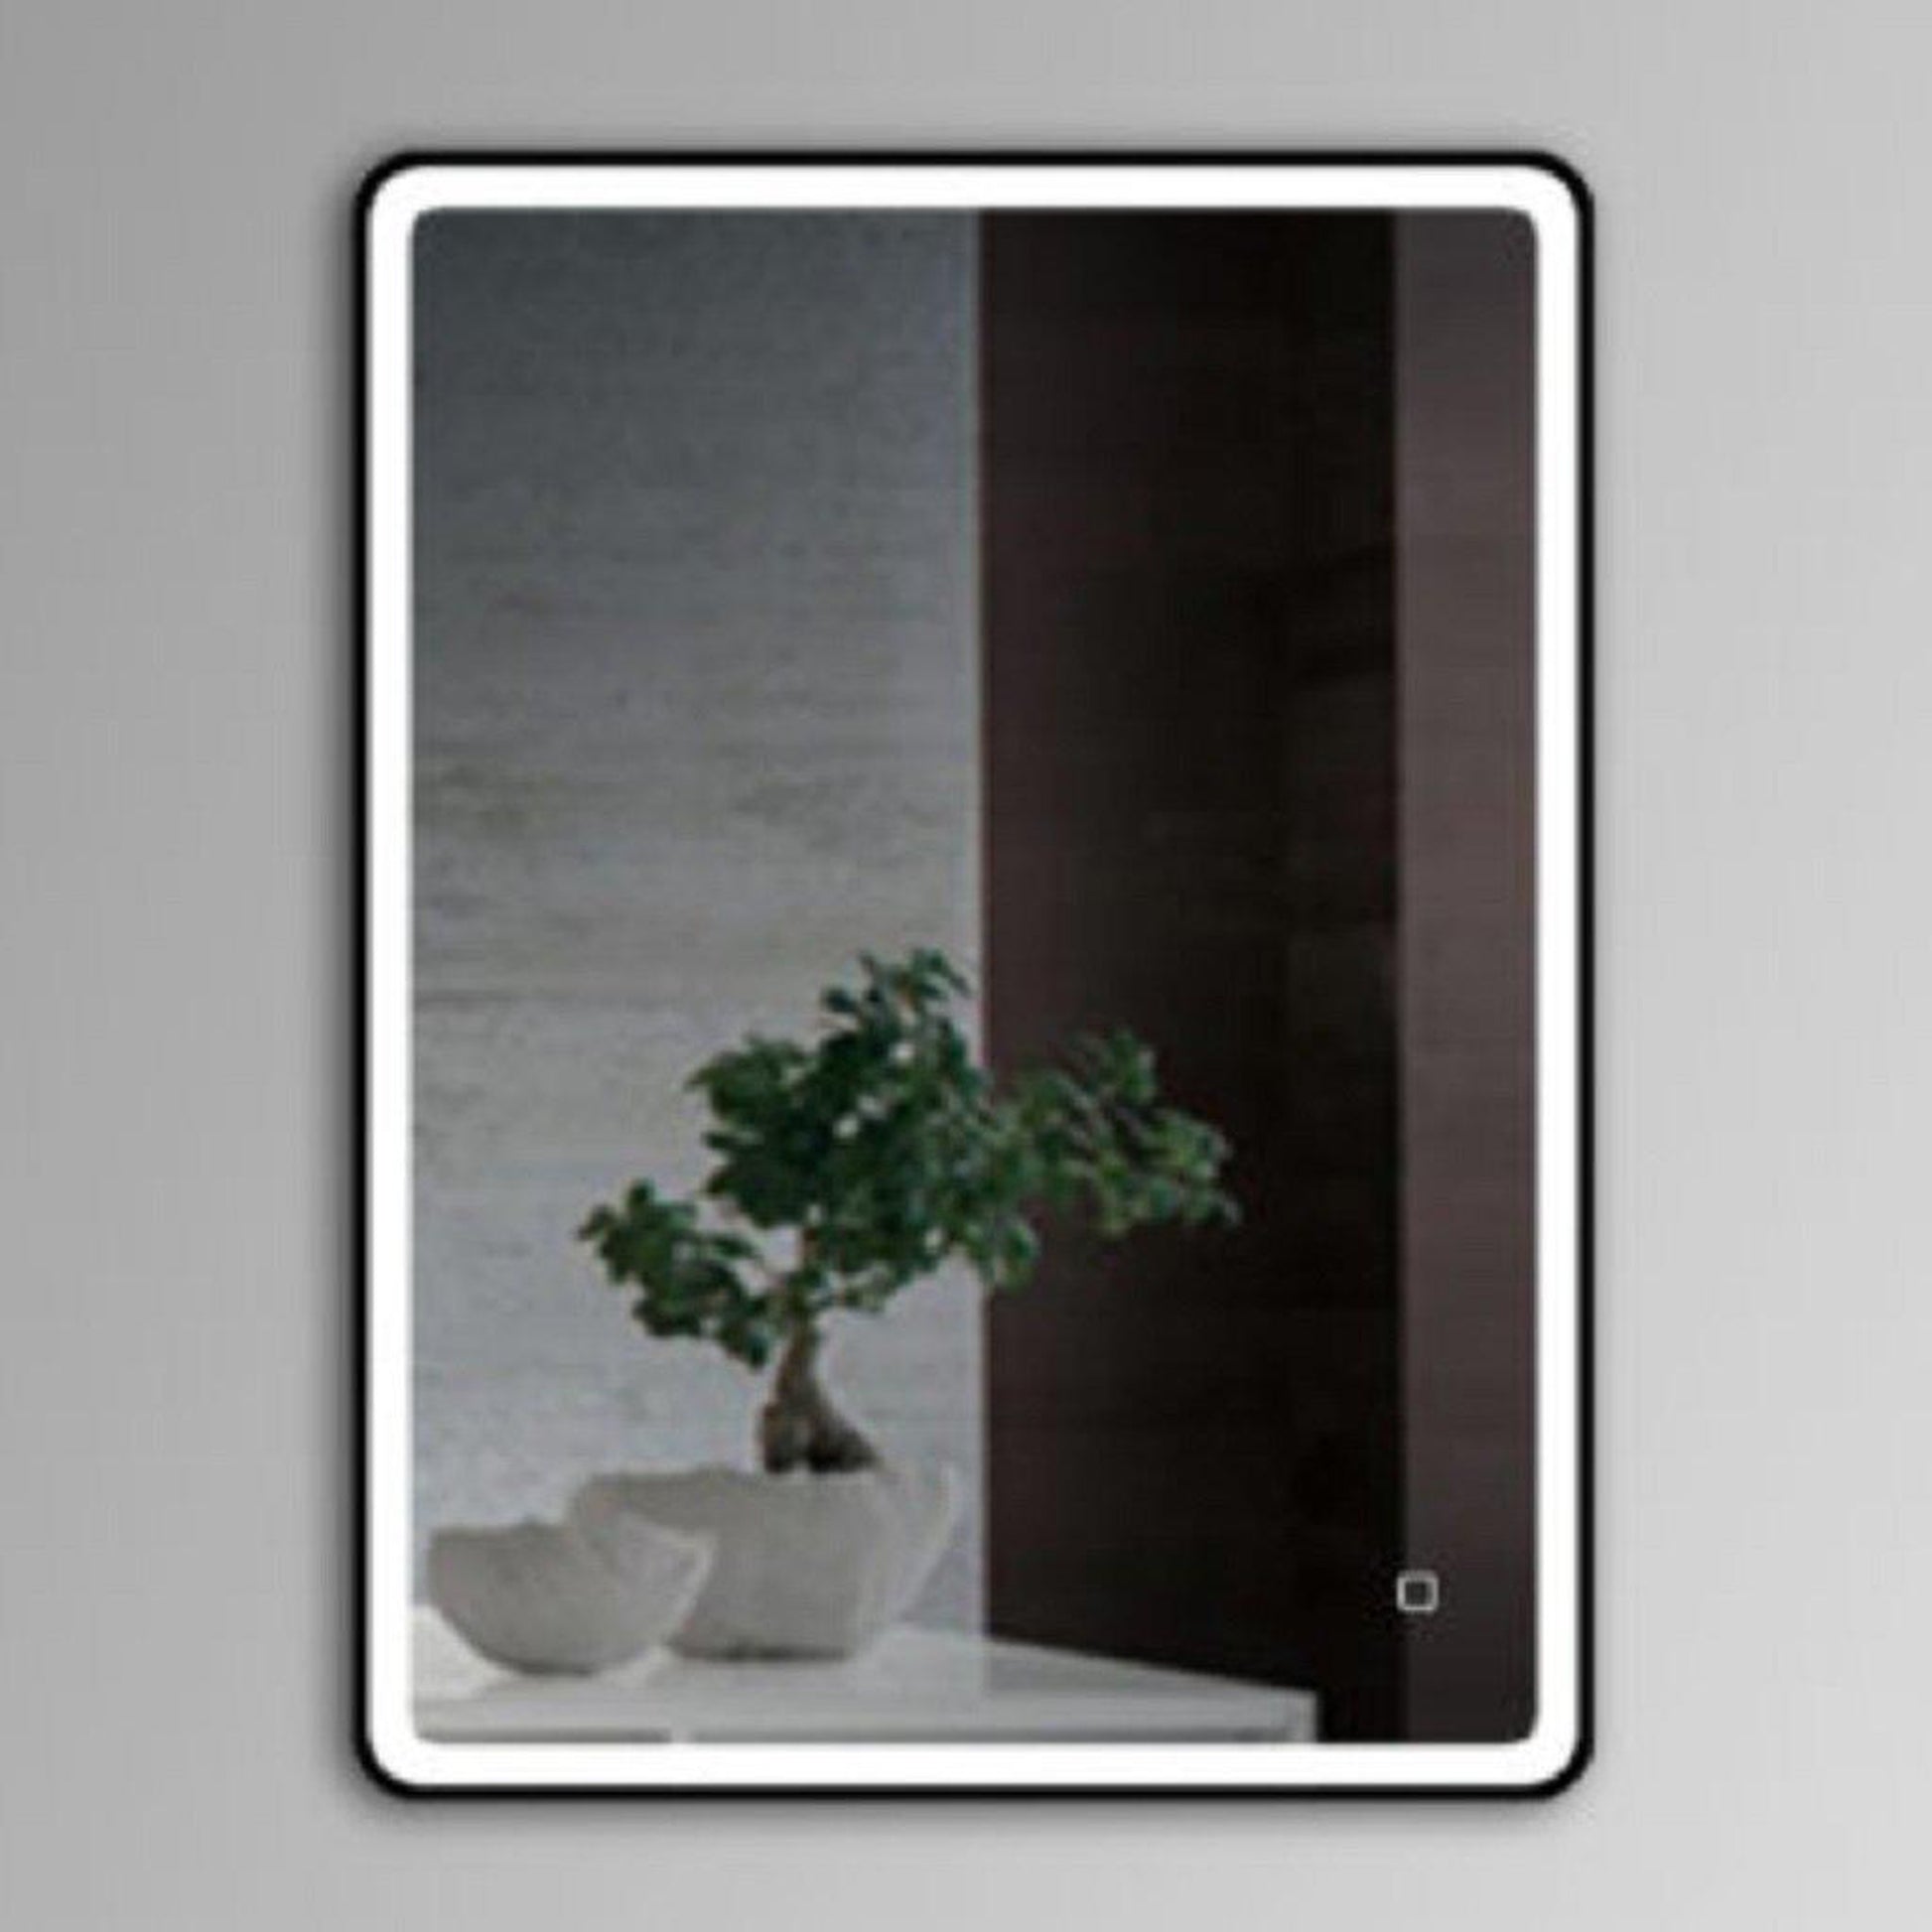 Lighted Impressions Belmar 30" x 36" Rectangular Framed Wall-Mounted LED Mirror With Dimmable Touch Sensor